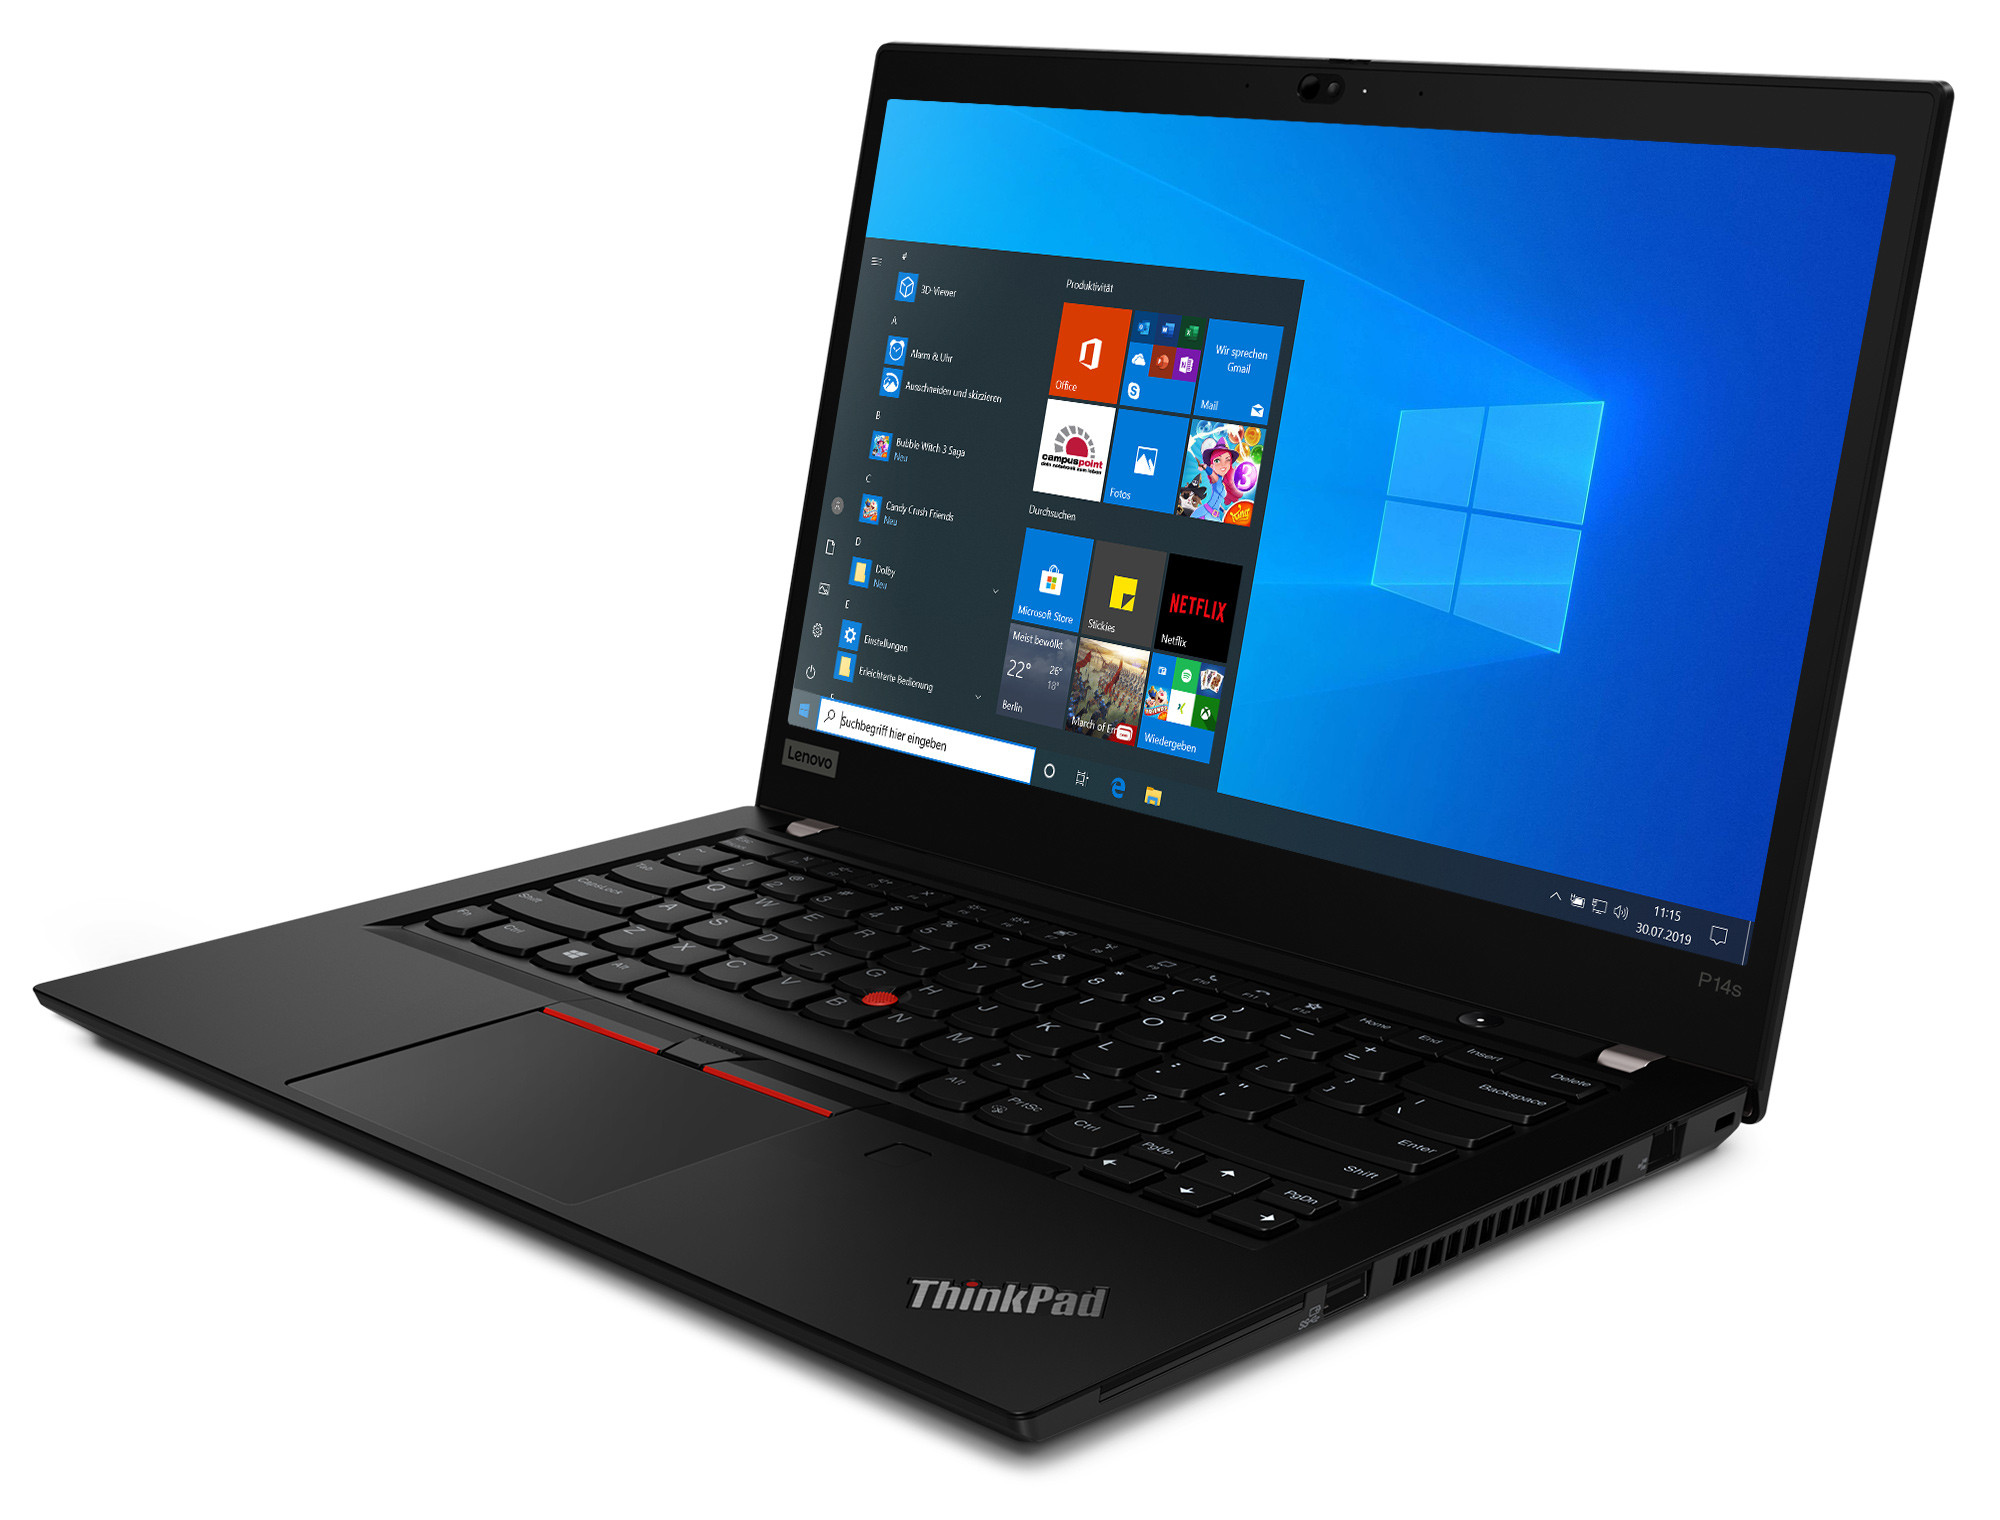 Lenovo ThinkPad P14s Gen 2 laptop in review: Compact workstation with